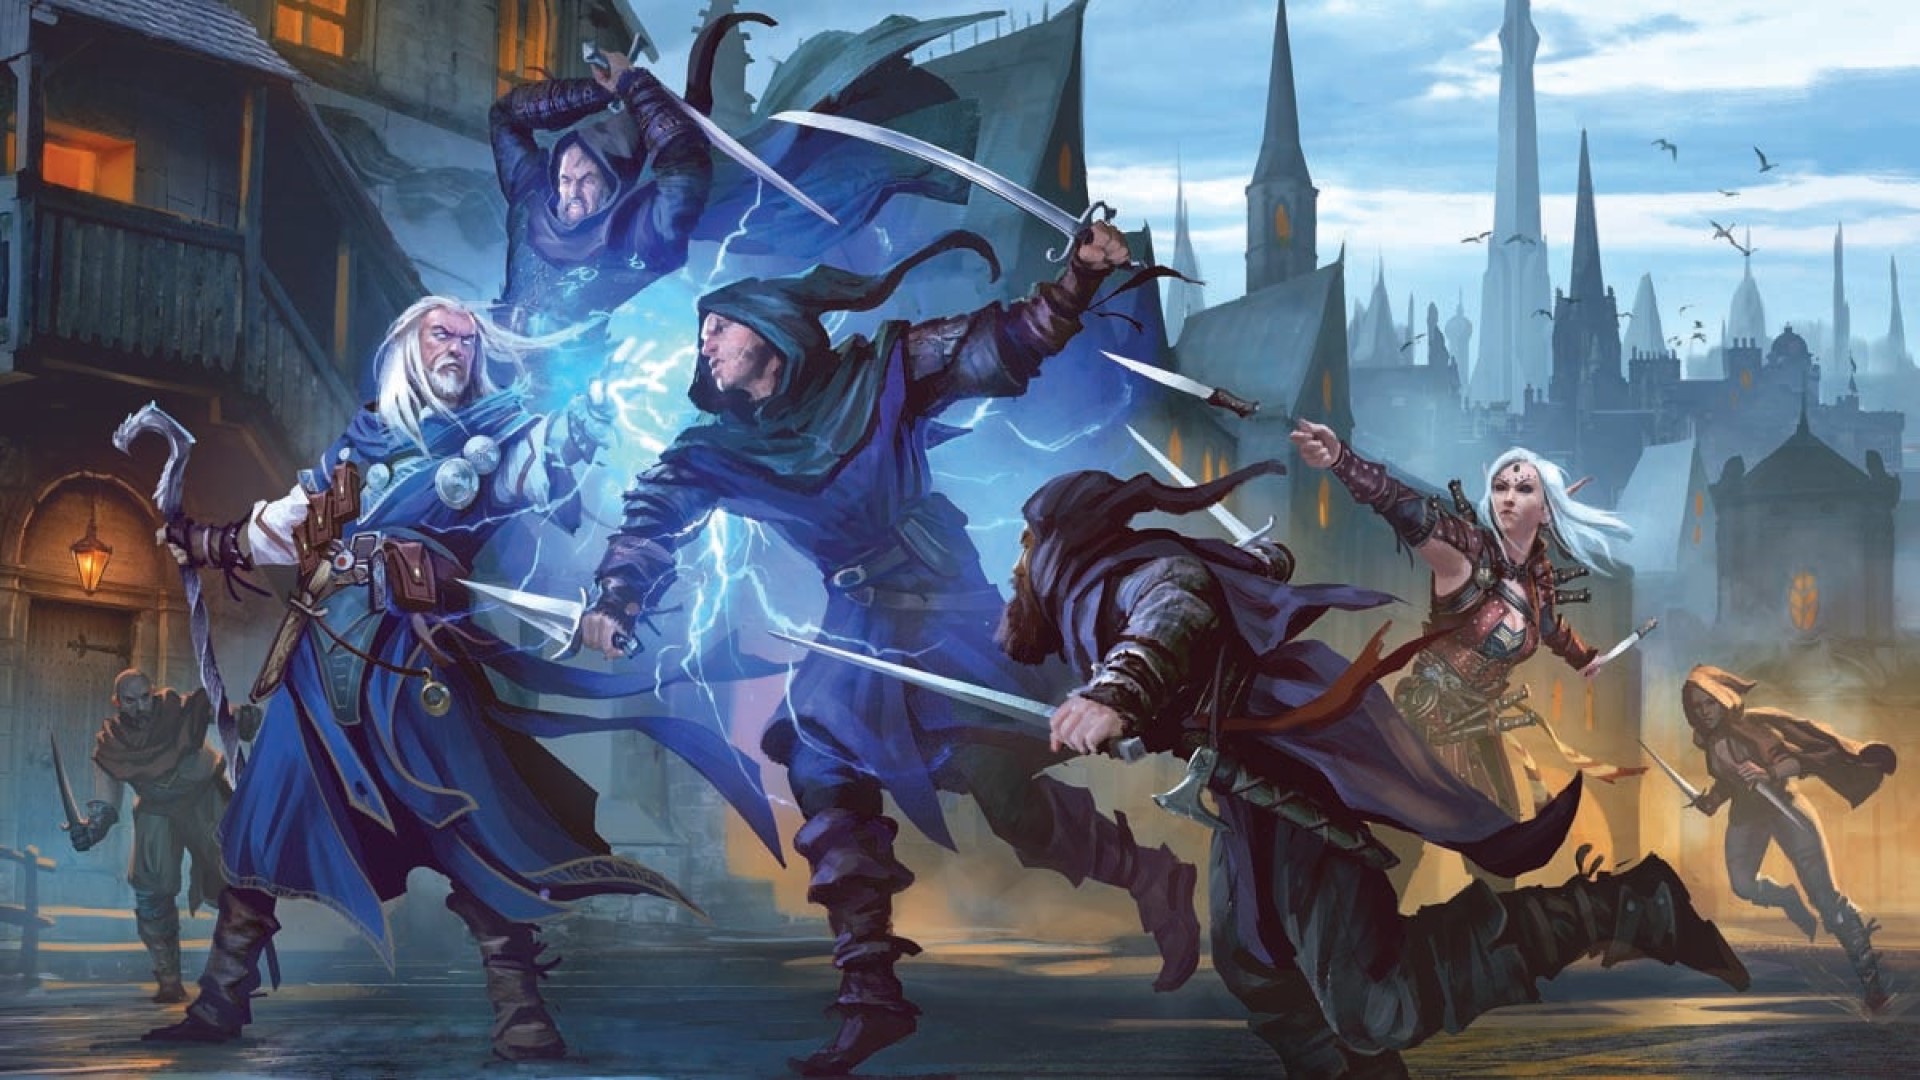 Pathfinder 2E' Humble Bundle Committed to Diversity and Social